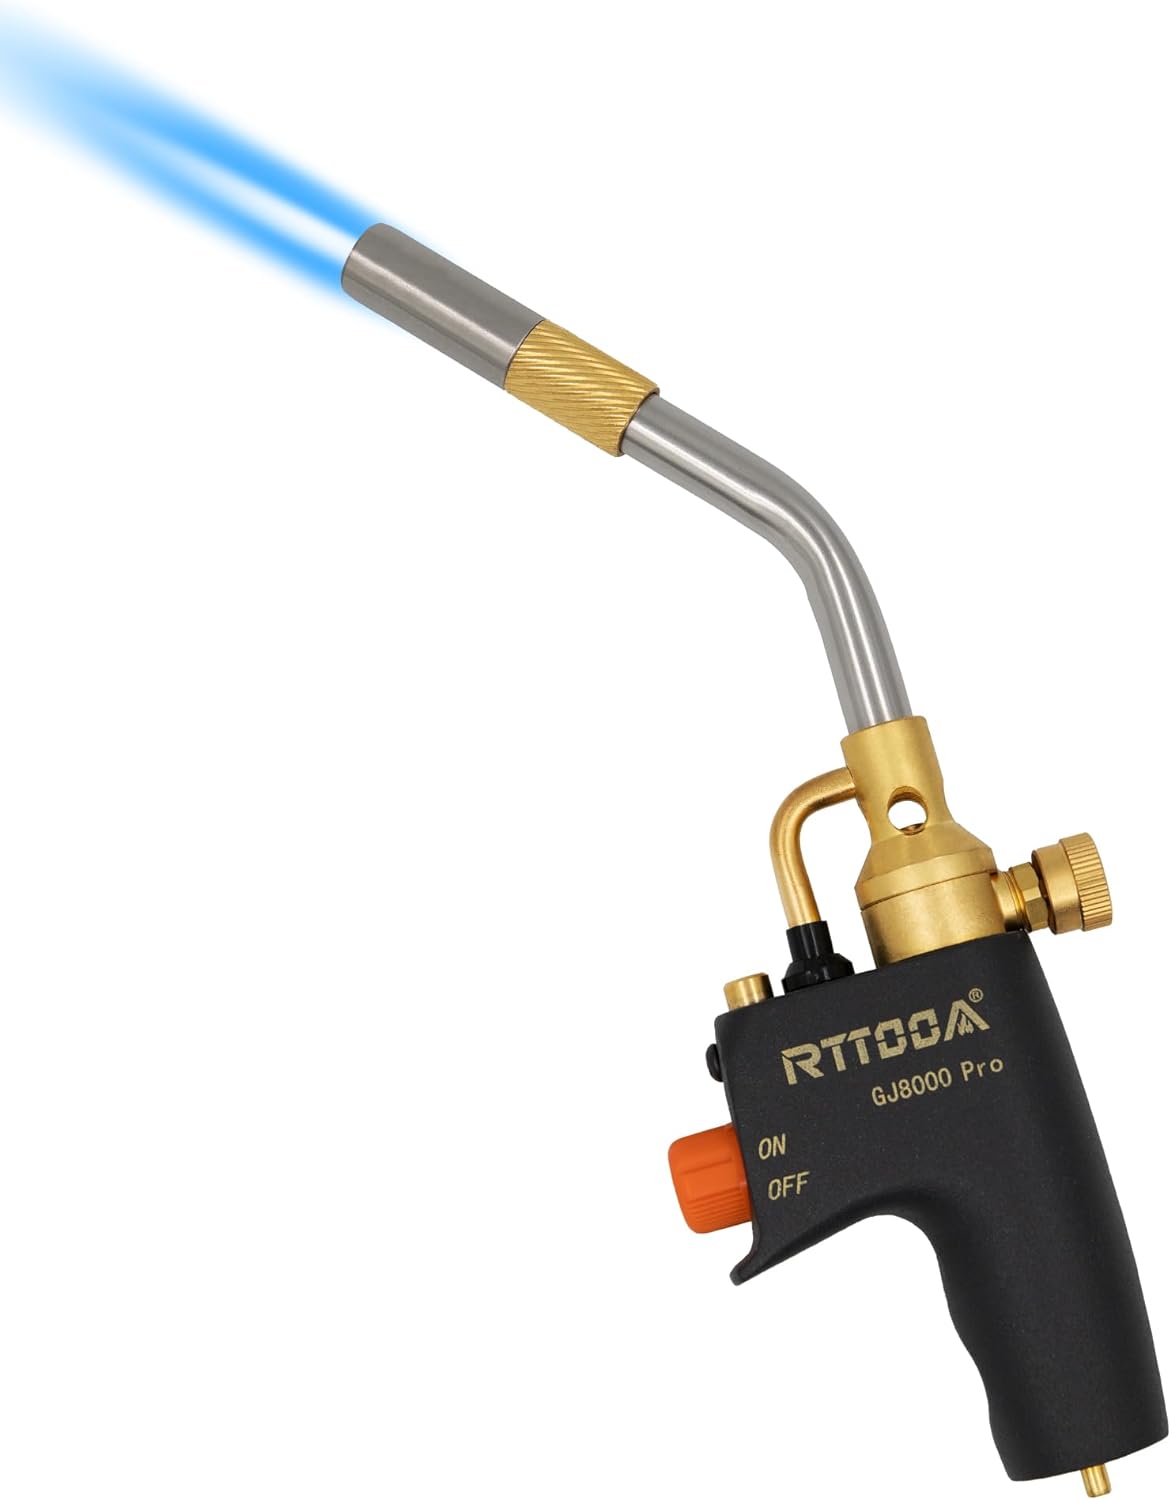 RTTOOA Propane Torch Head Review